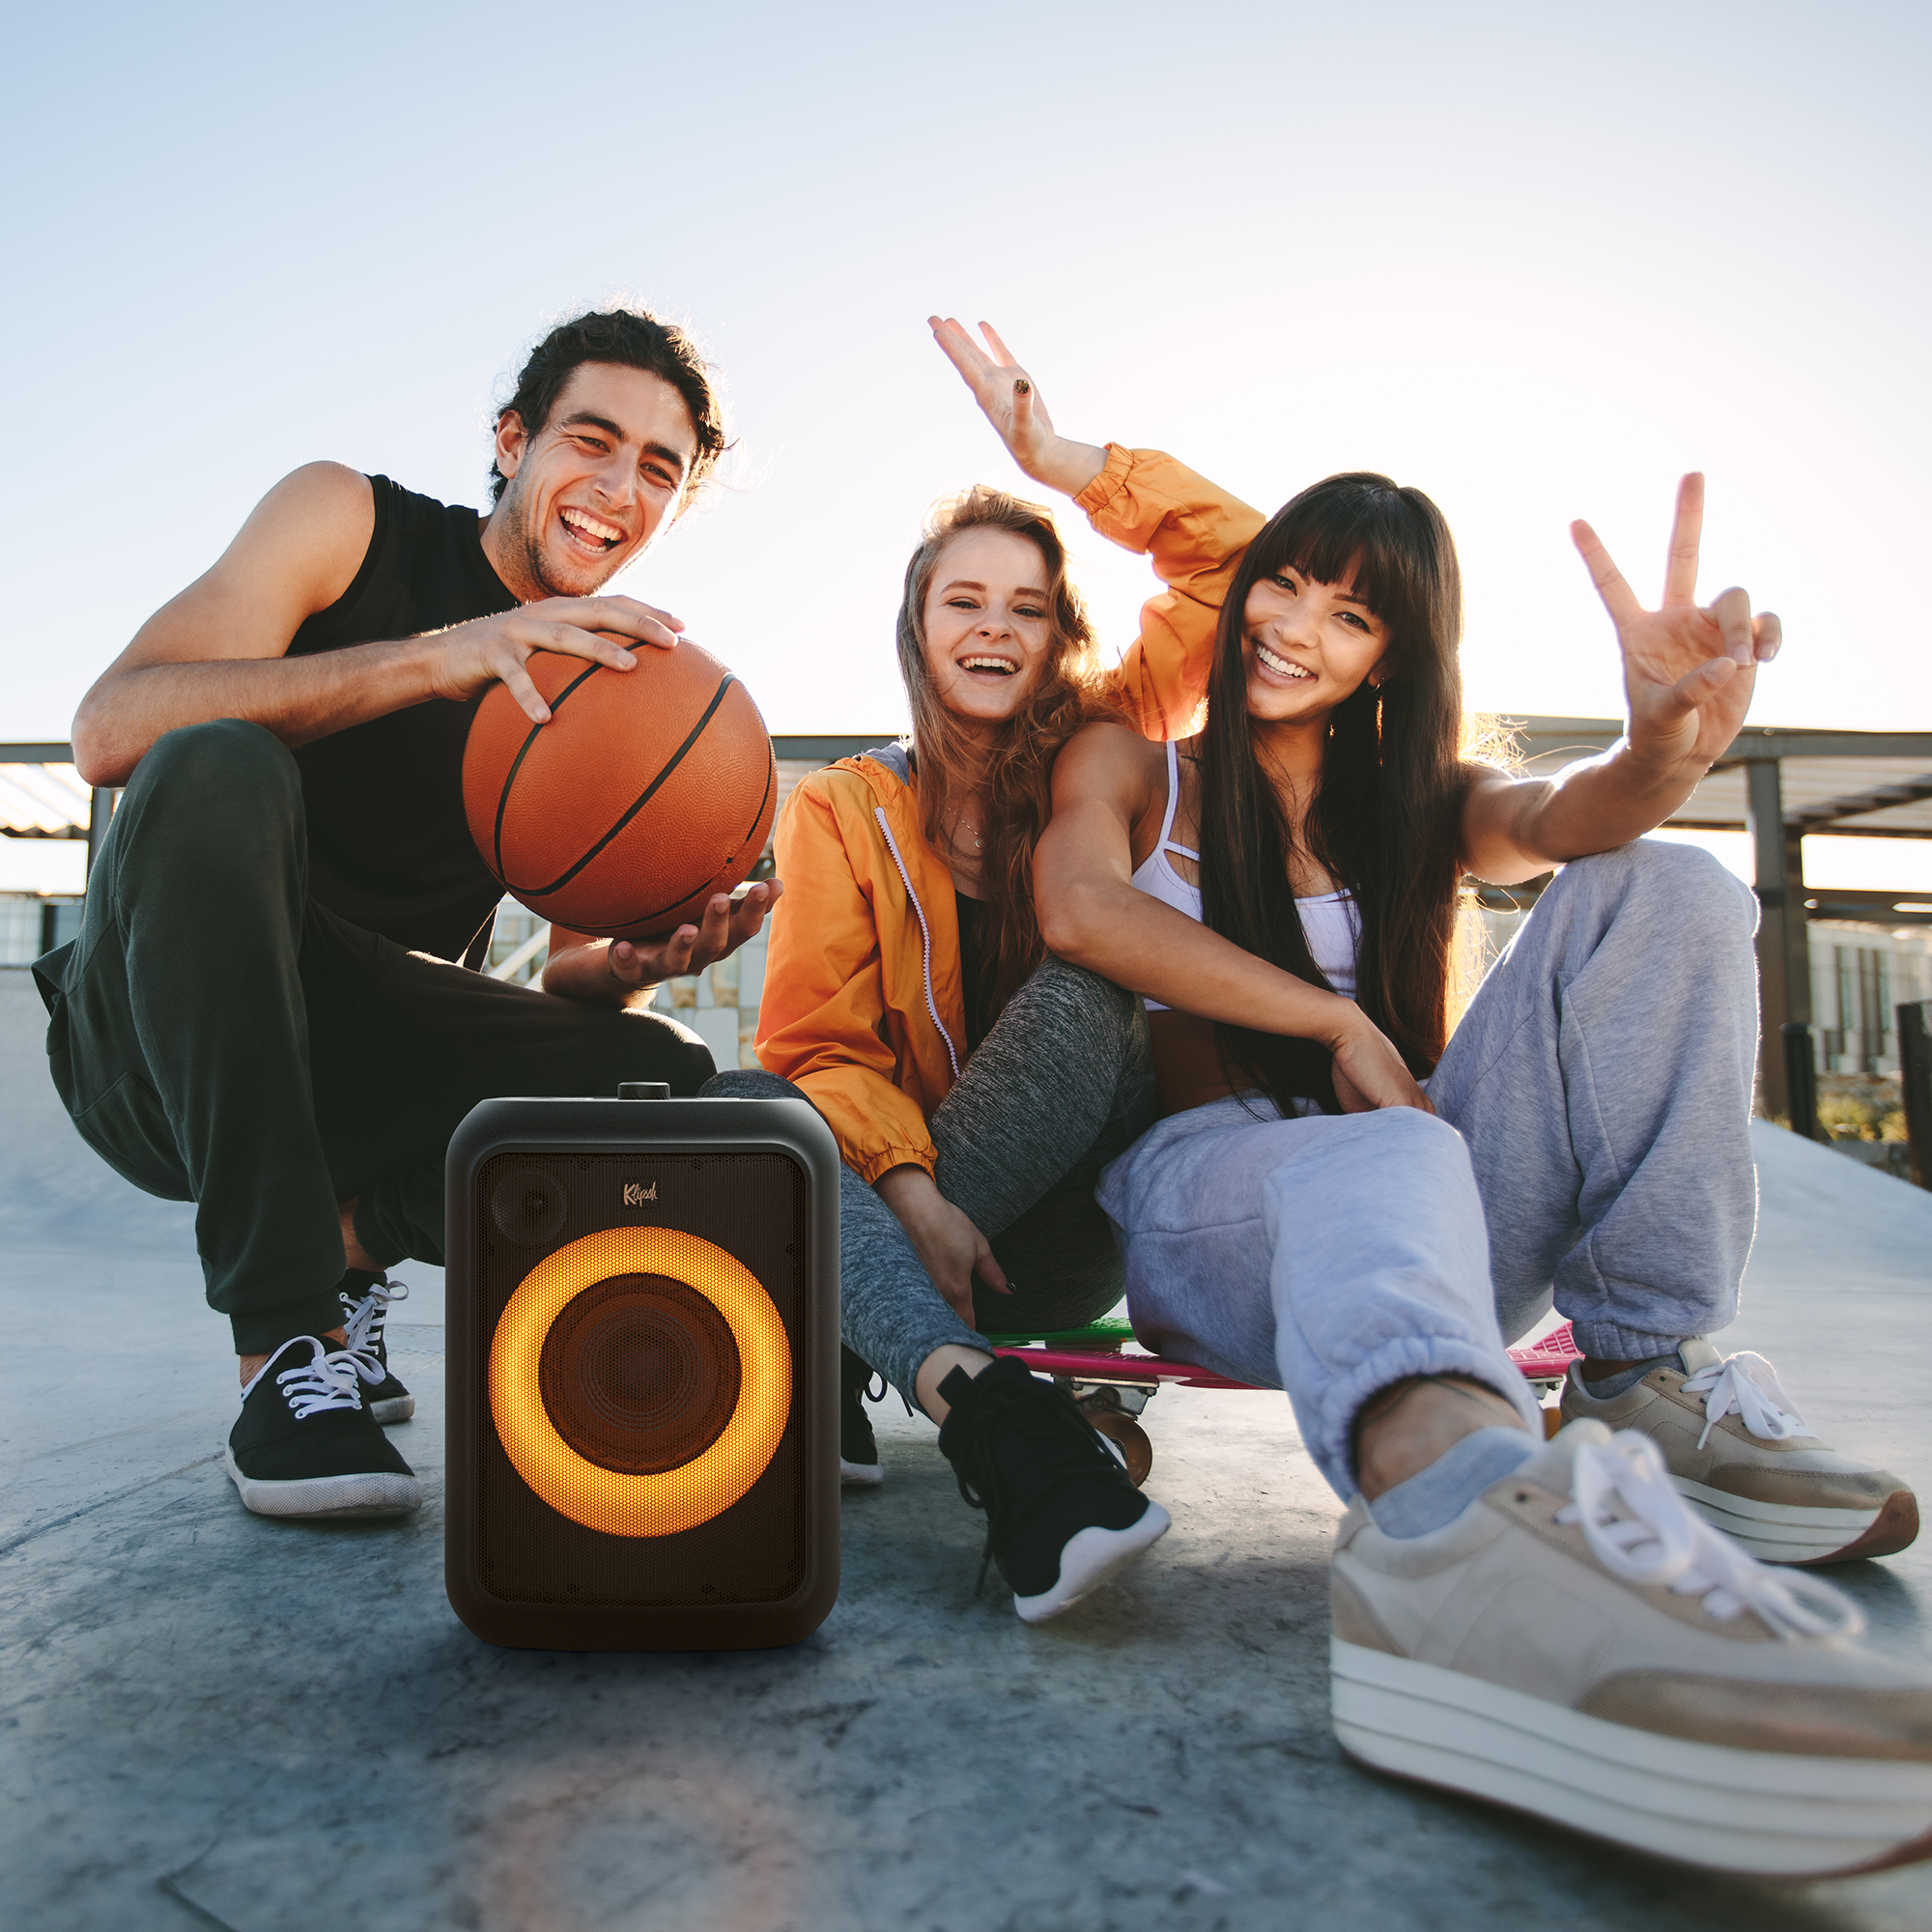 GIG-XL-with-Friends-at-Outdoor-Sports-Court_2000x2000